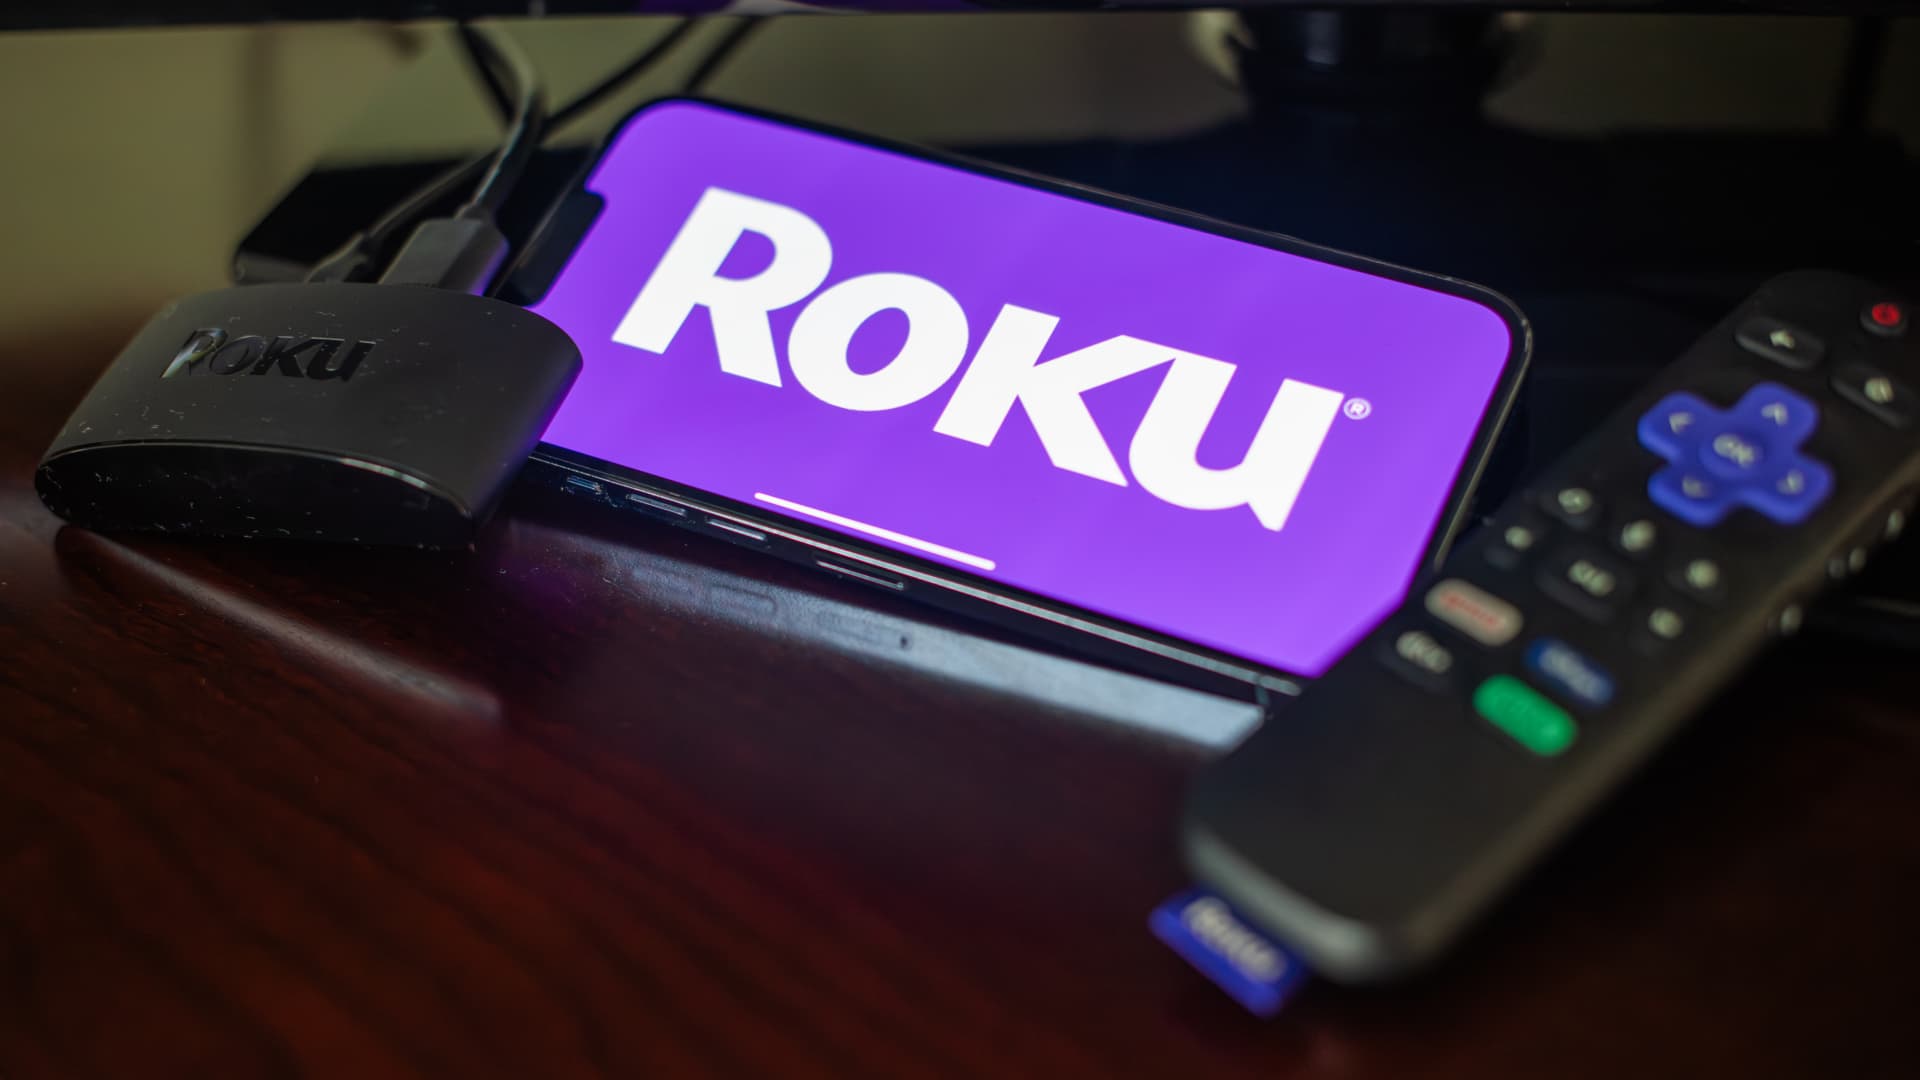 Roku to lay off 10% of workforce, stock jumps